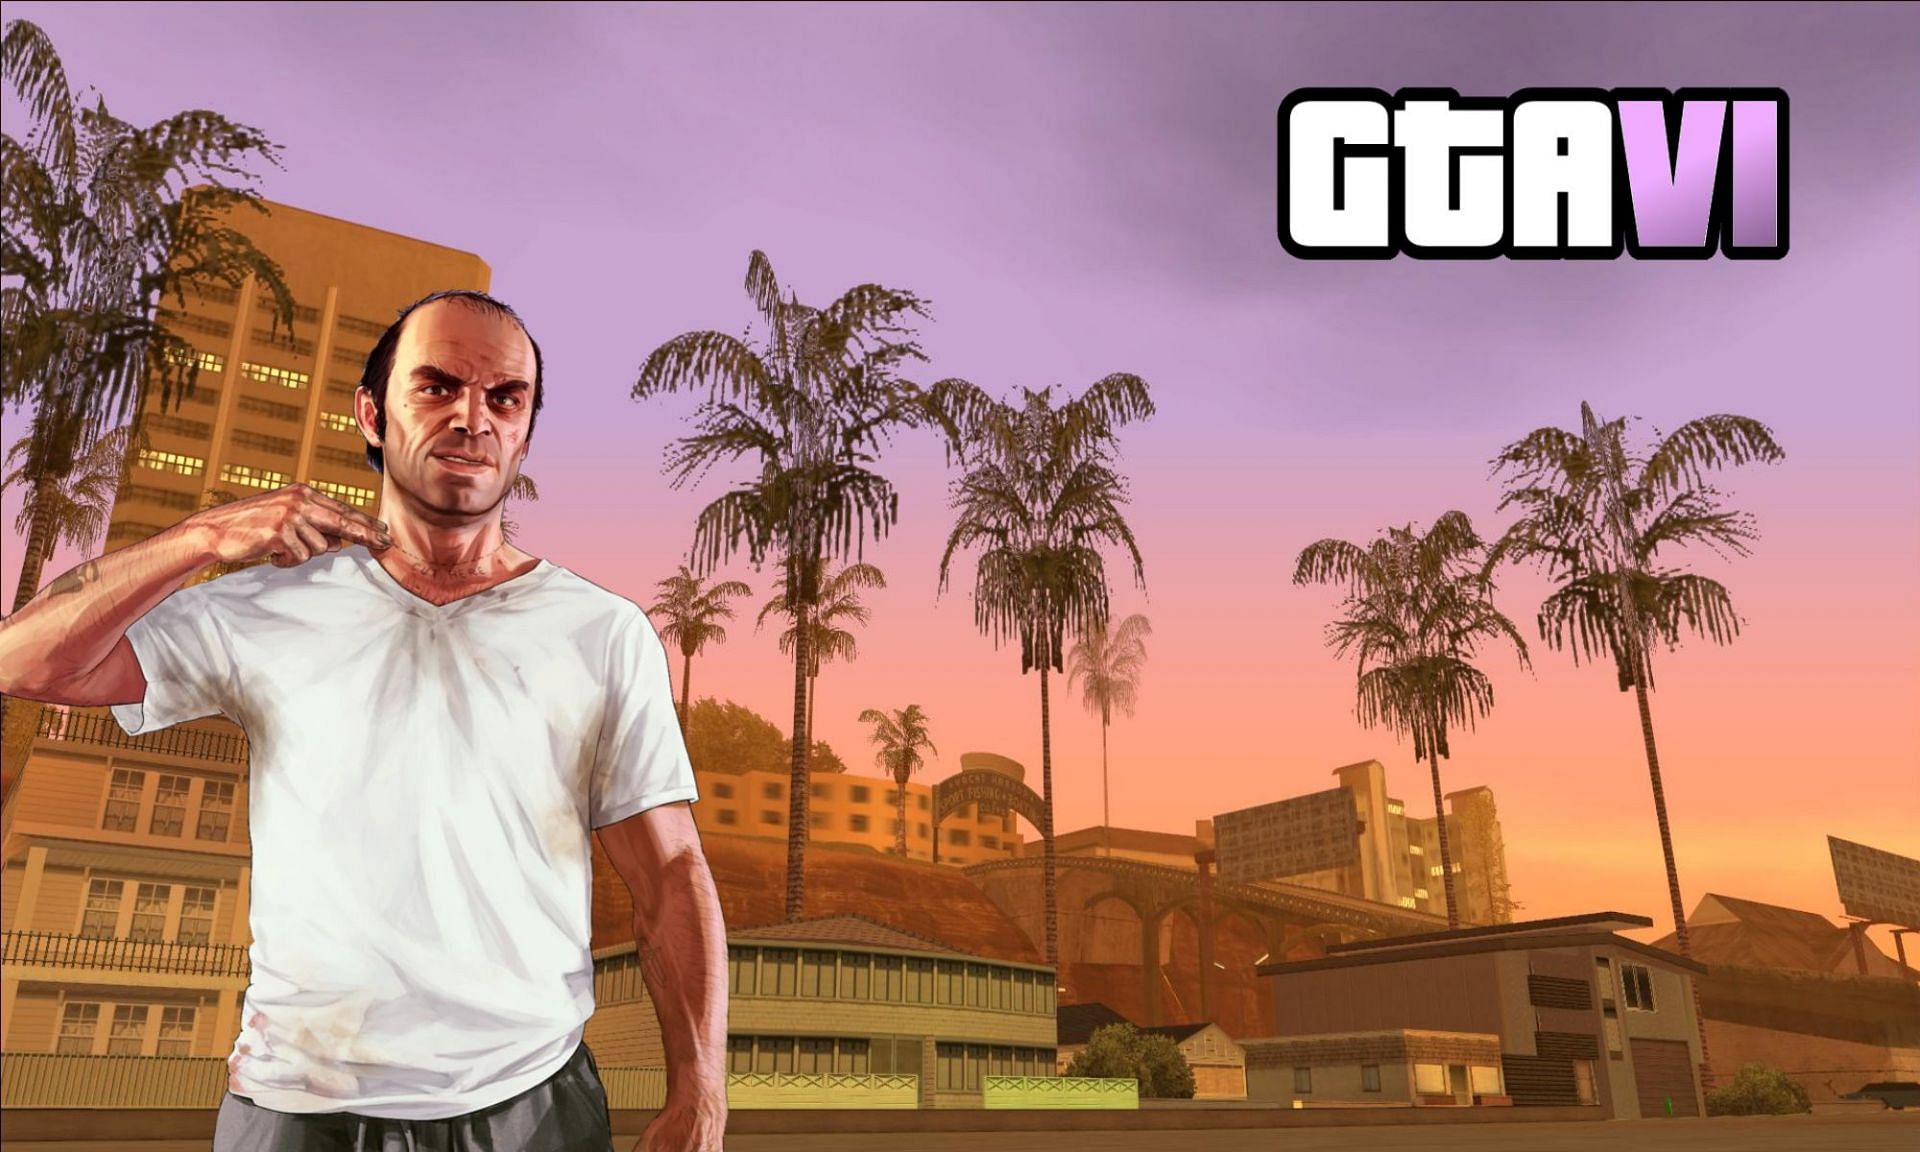 Niko Bellic and a few GTA 5 characters who are likely to return in GTA 6